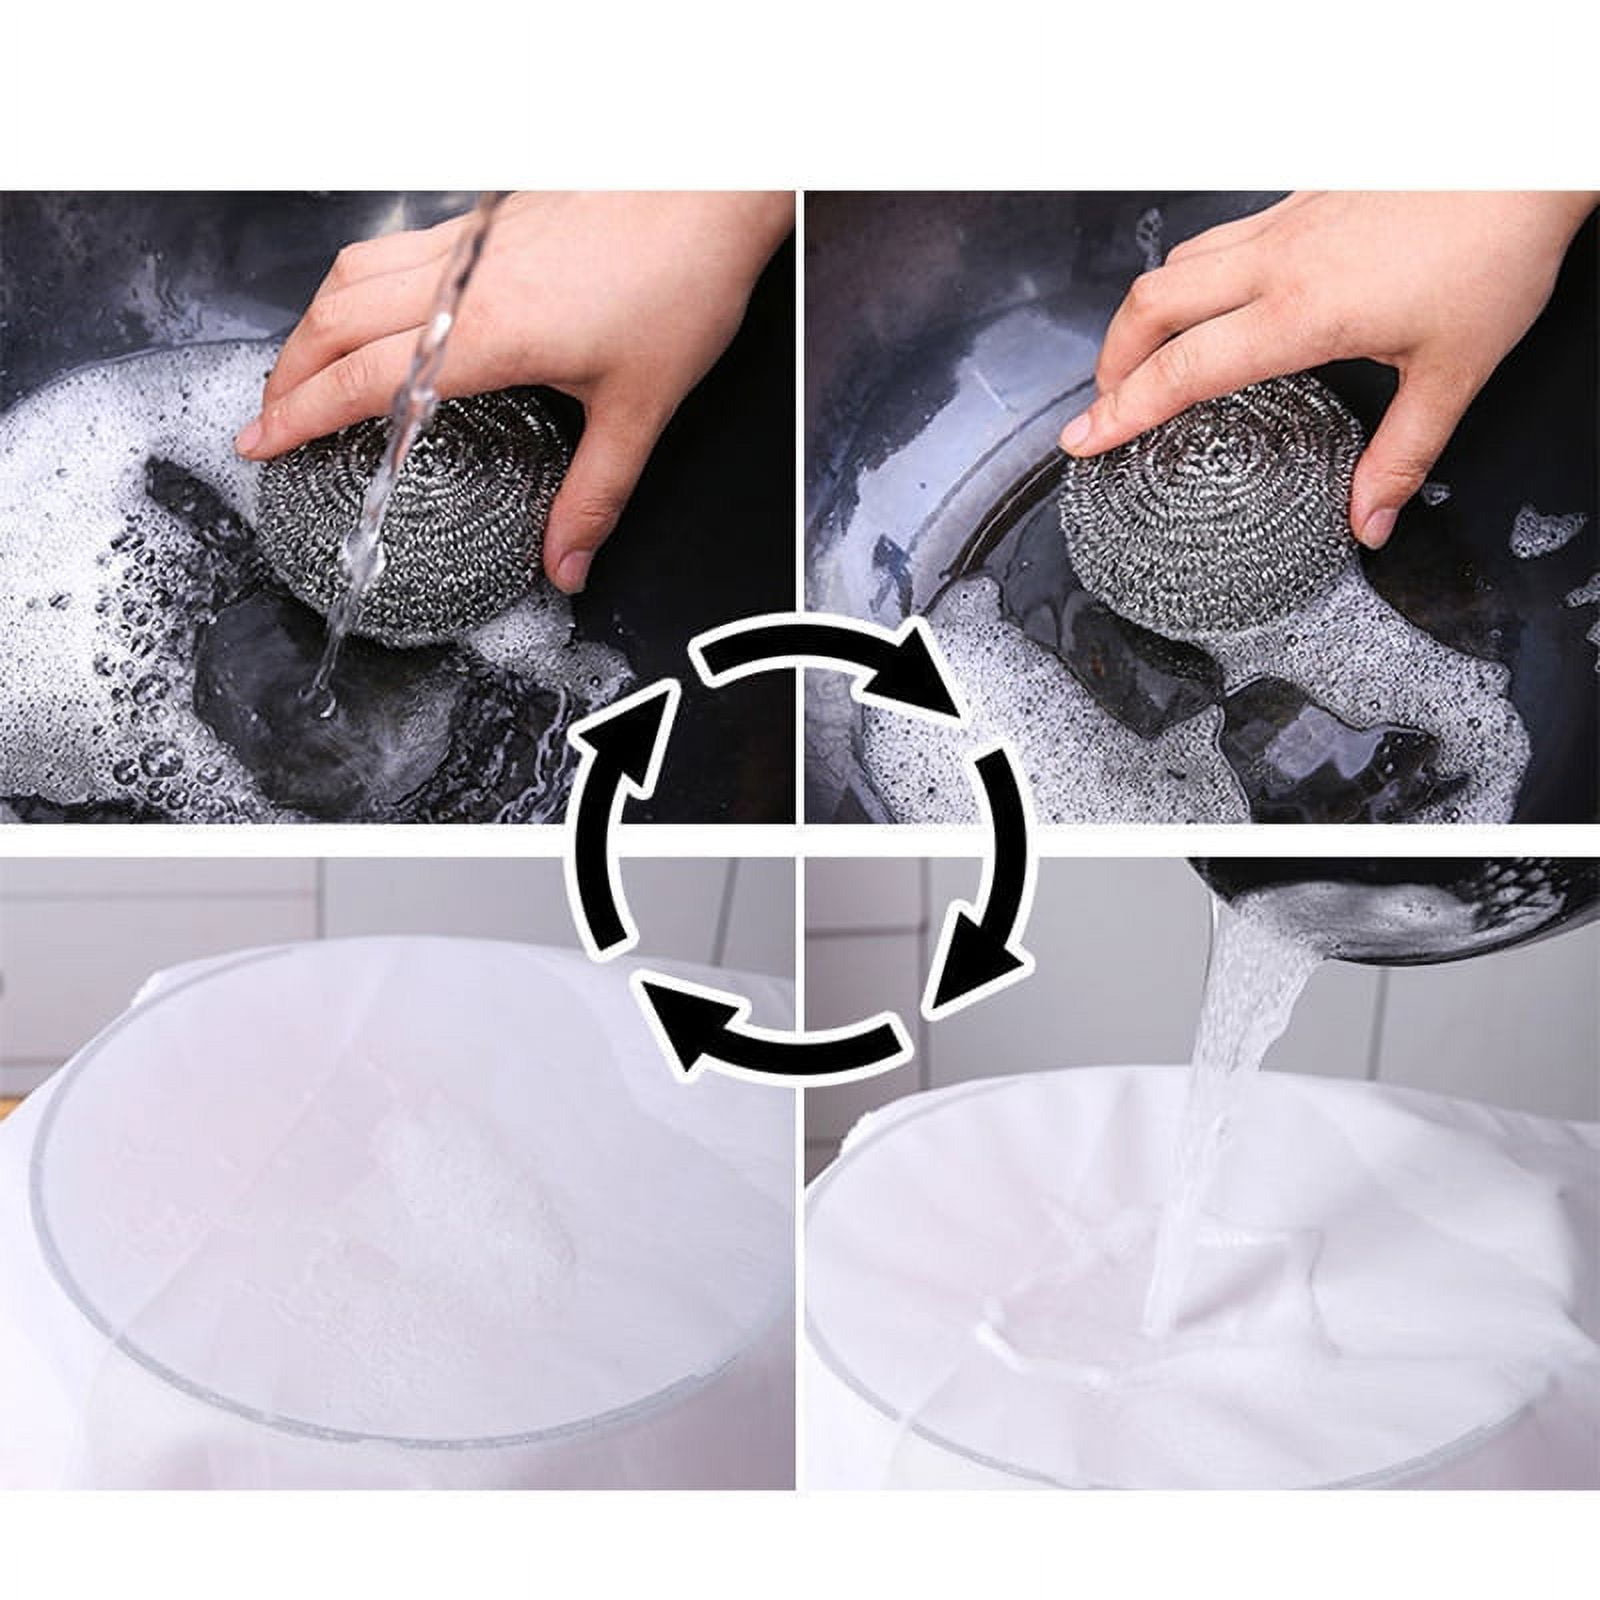 20 Pcs Stainless Steel Sponges Scrubbers Cleaning Ball Utensil Scrubber  Density Metal Scrubber Scouring Pads Ball For Pot Pan Dish Wash Cleaning  For R